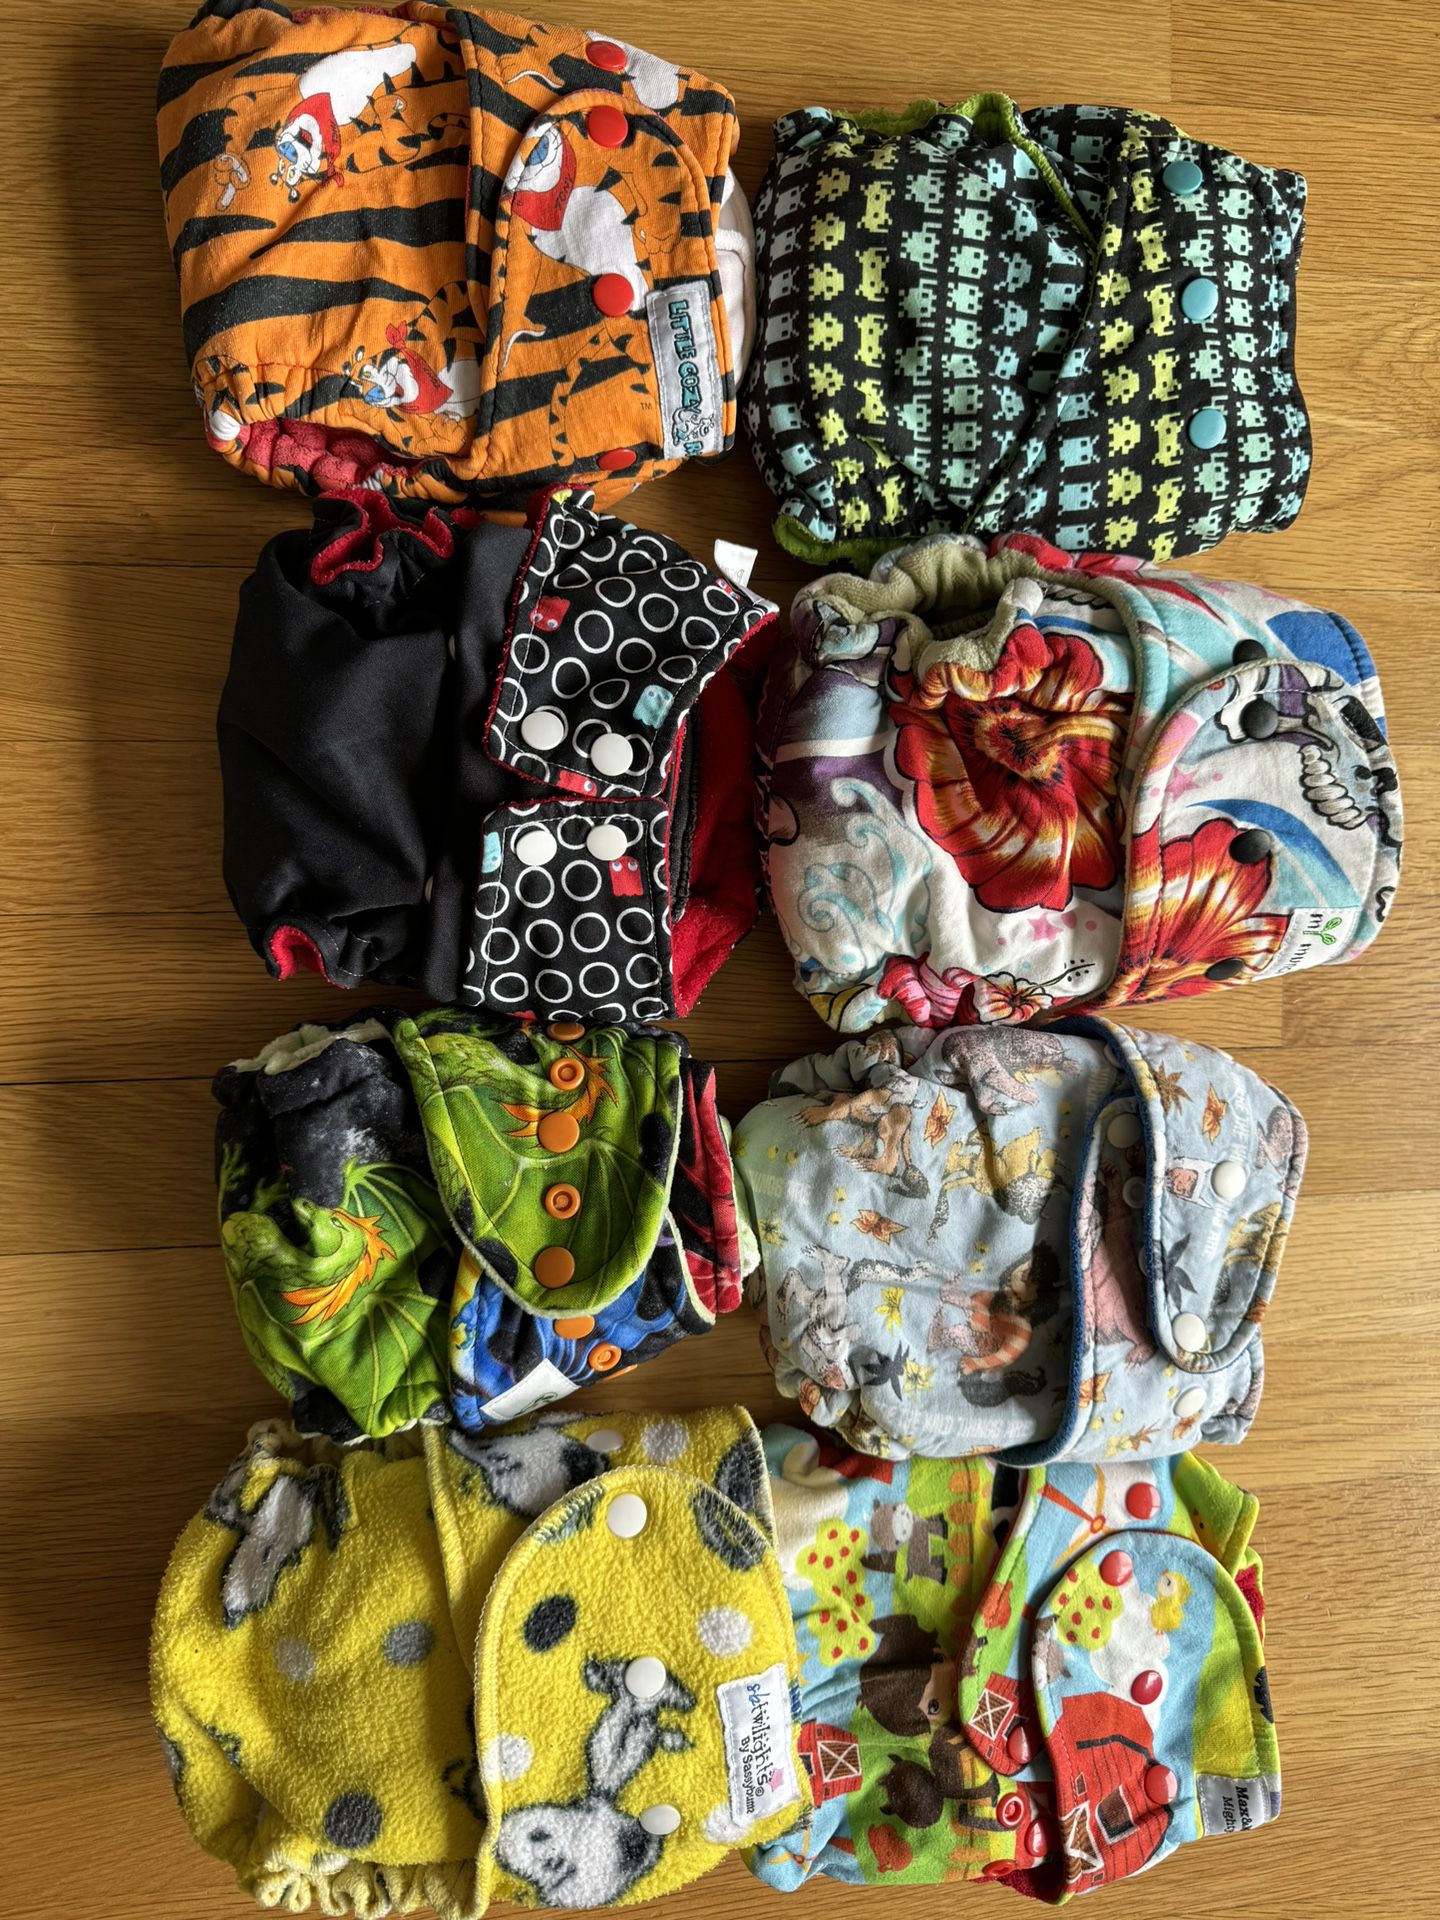 FREE Cloth Diapers